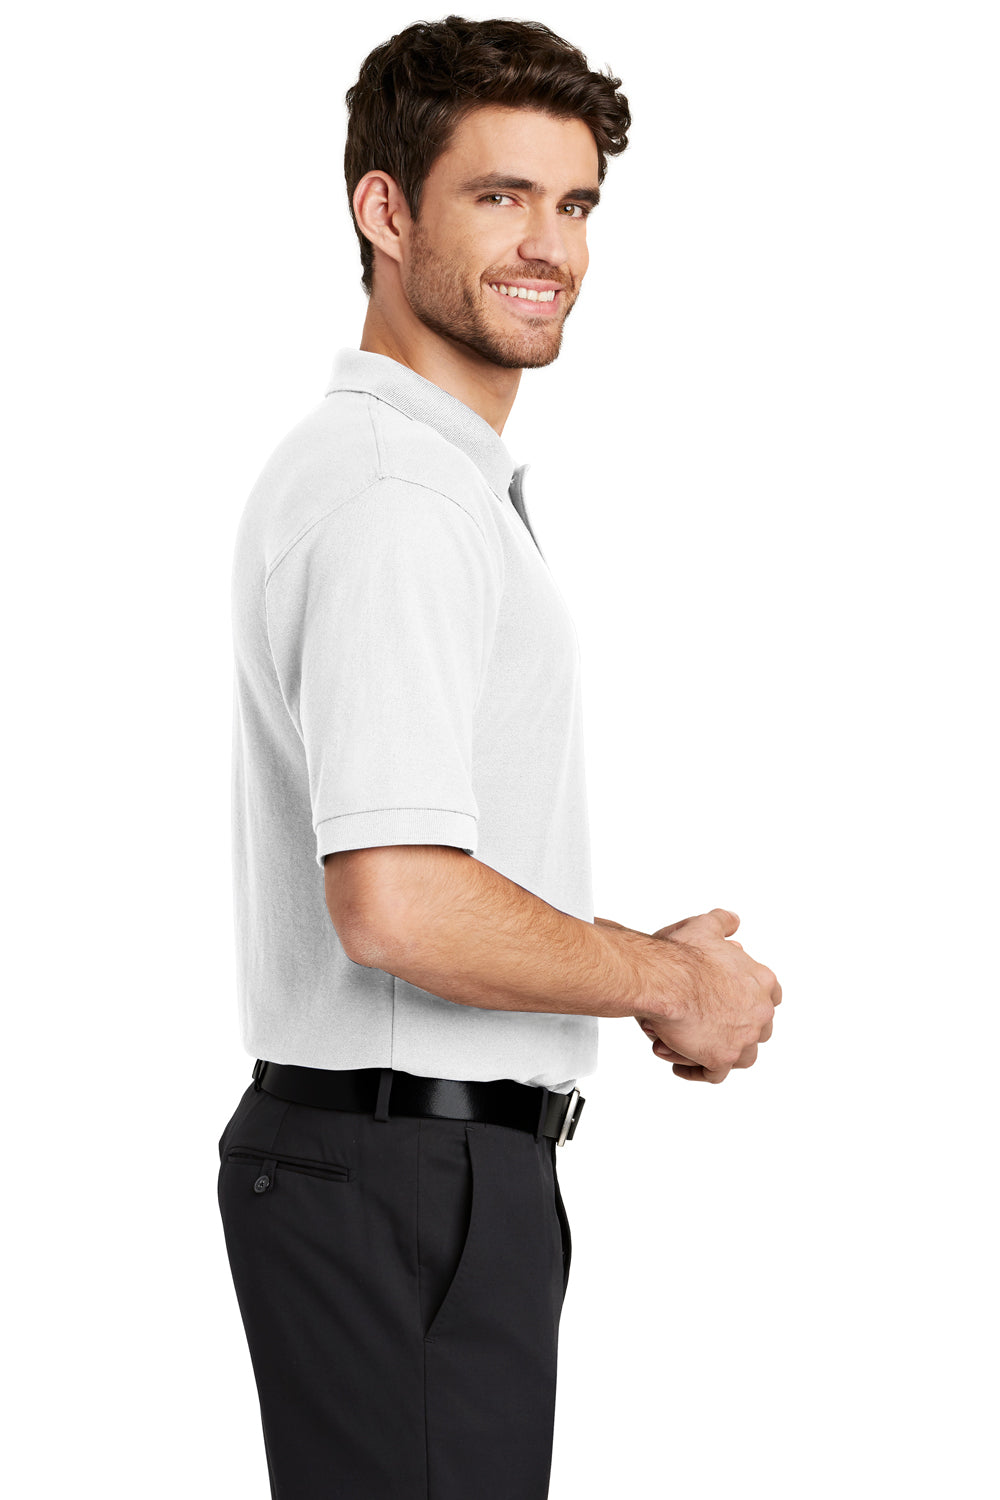 Port Authority K500P Mens Silk Touch Wrinkle Resistant Short Sleeve Polo Shirt w/ Pocket White Side